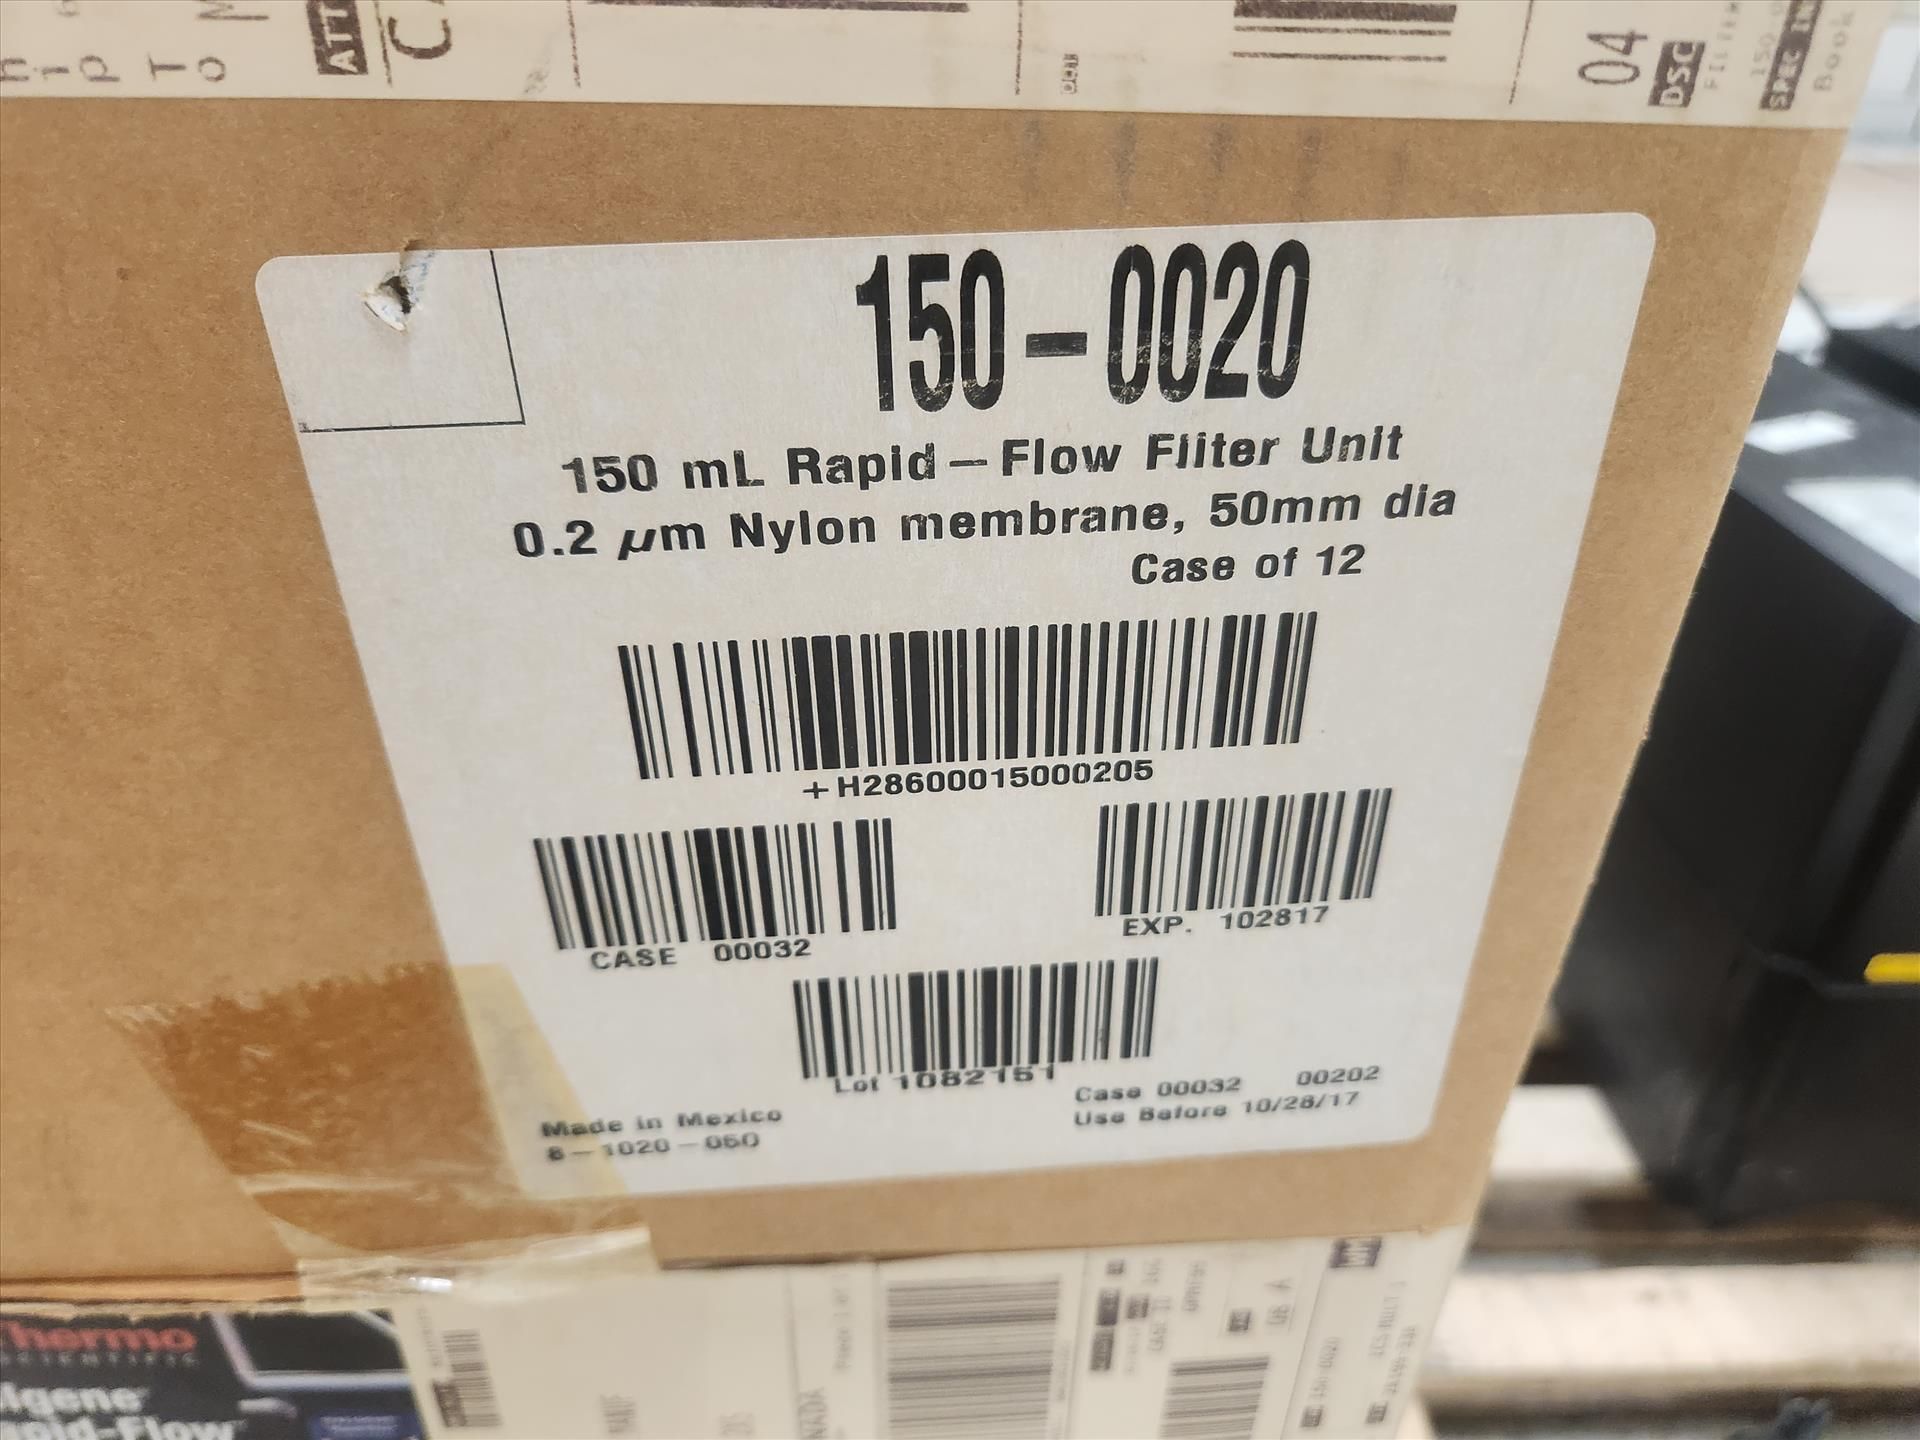 (skid) Thermo Sci. Nalgene Rapid-Flow filters, 150 ml NEW - Image 2 of 3